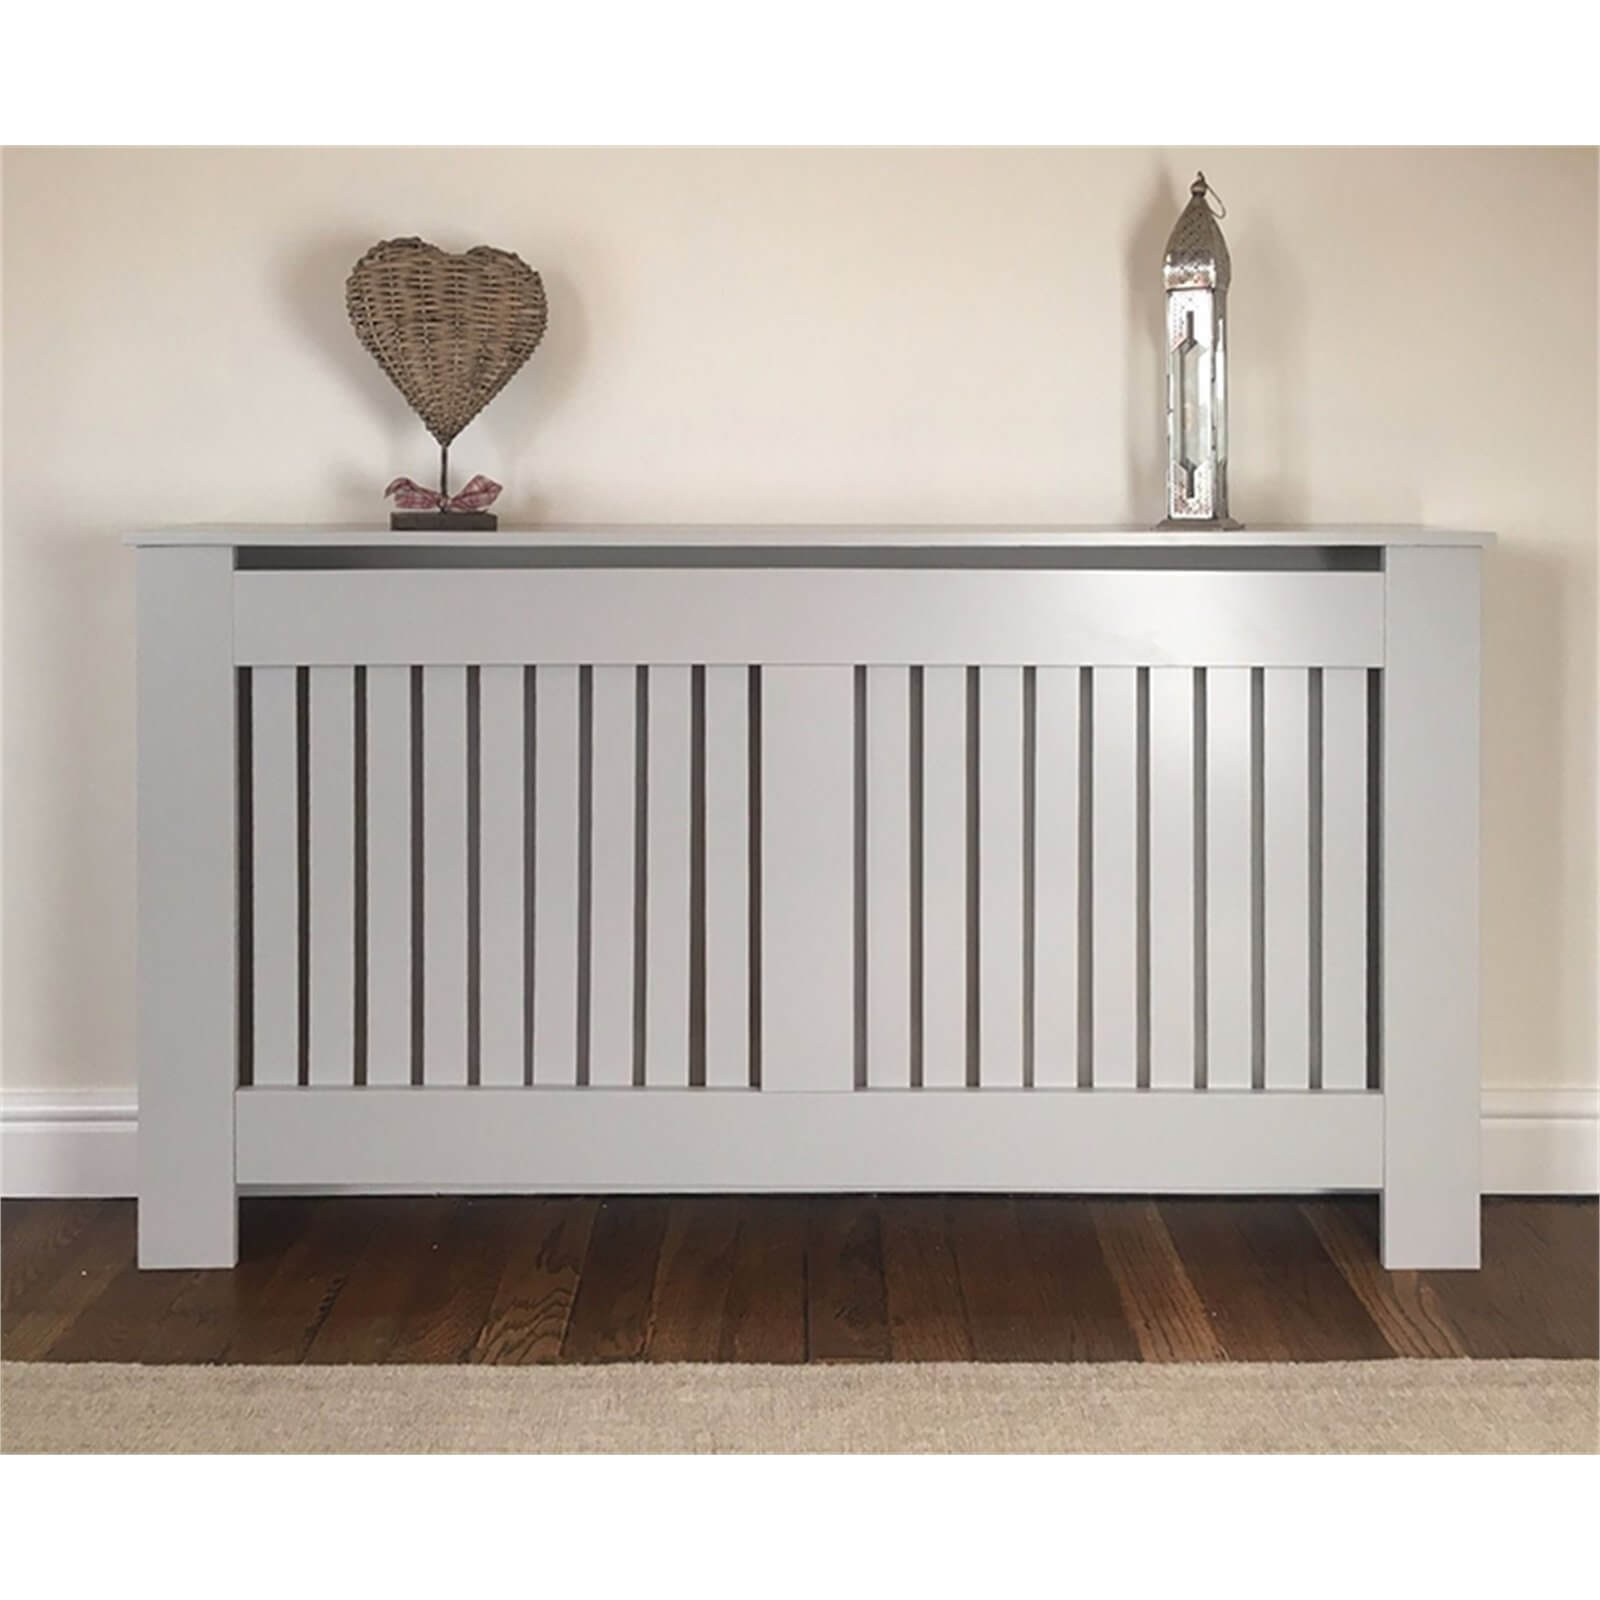 Radiator Cover with Vertical Slatted Design in Grey - Large